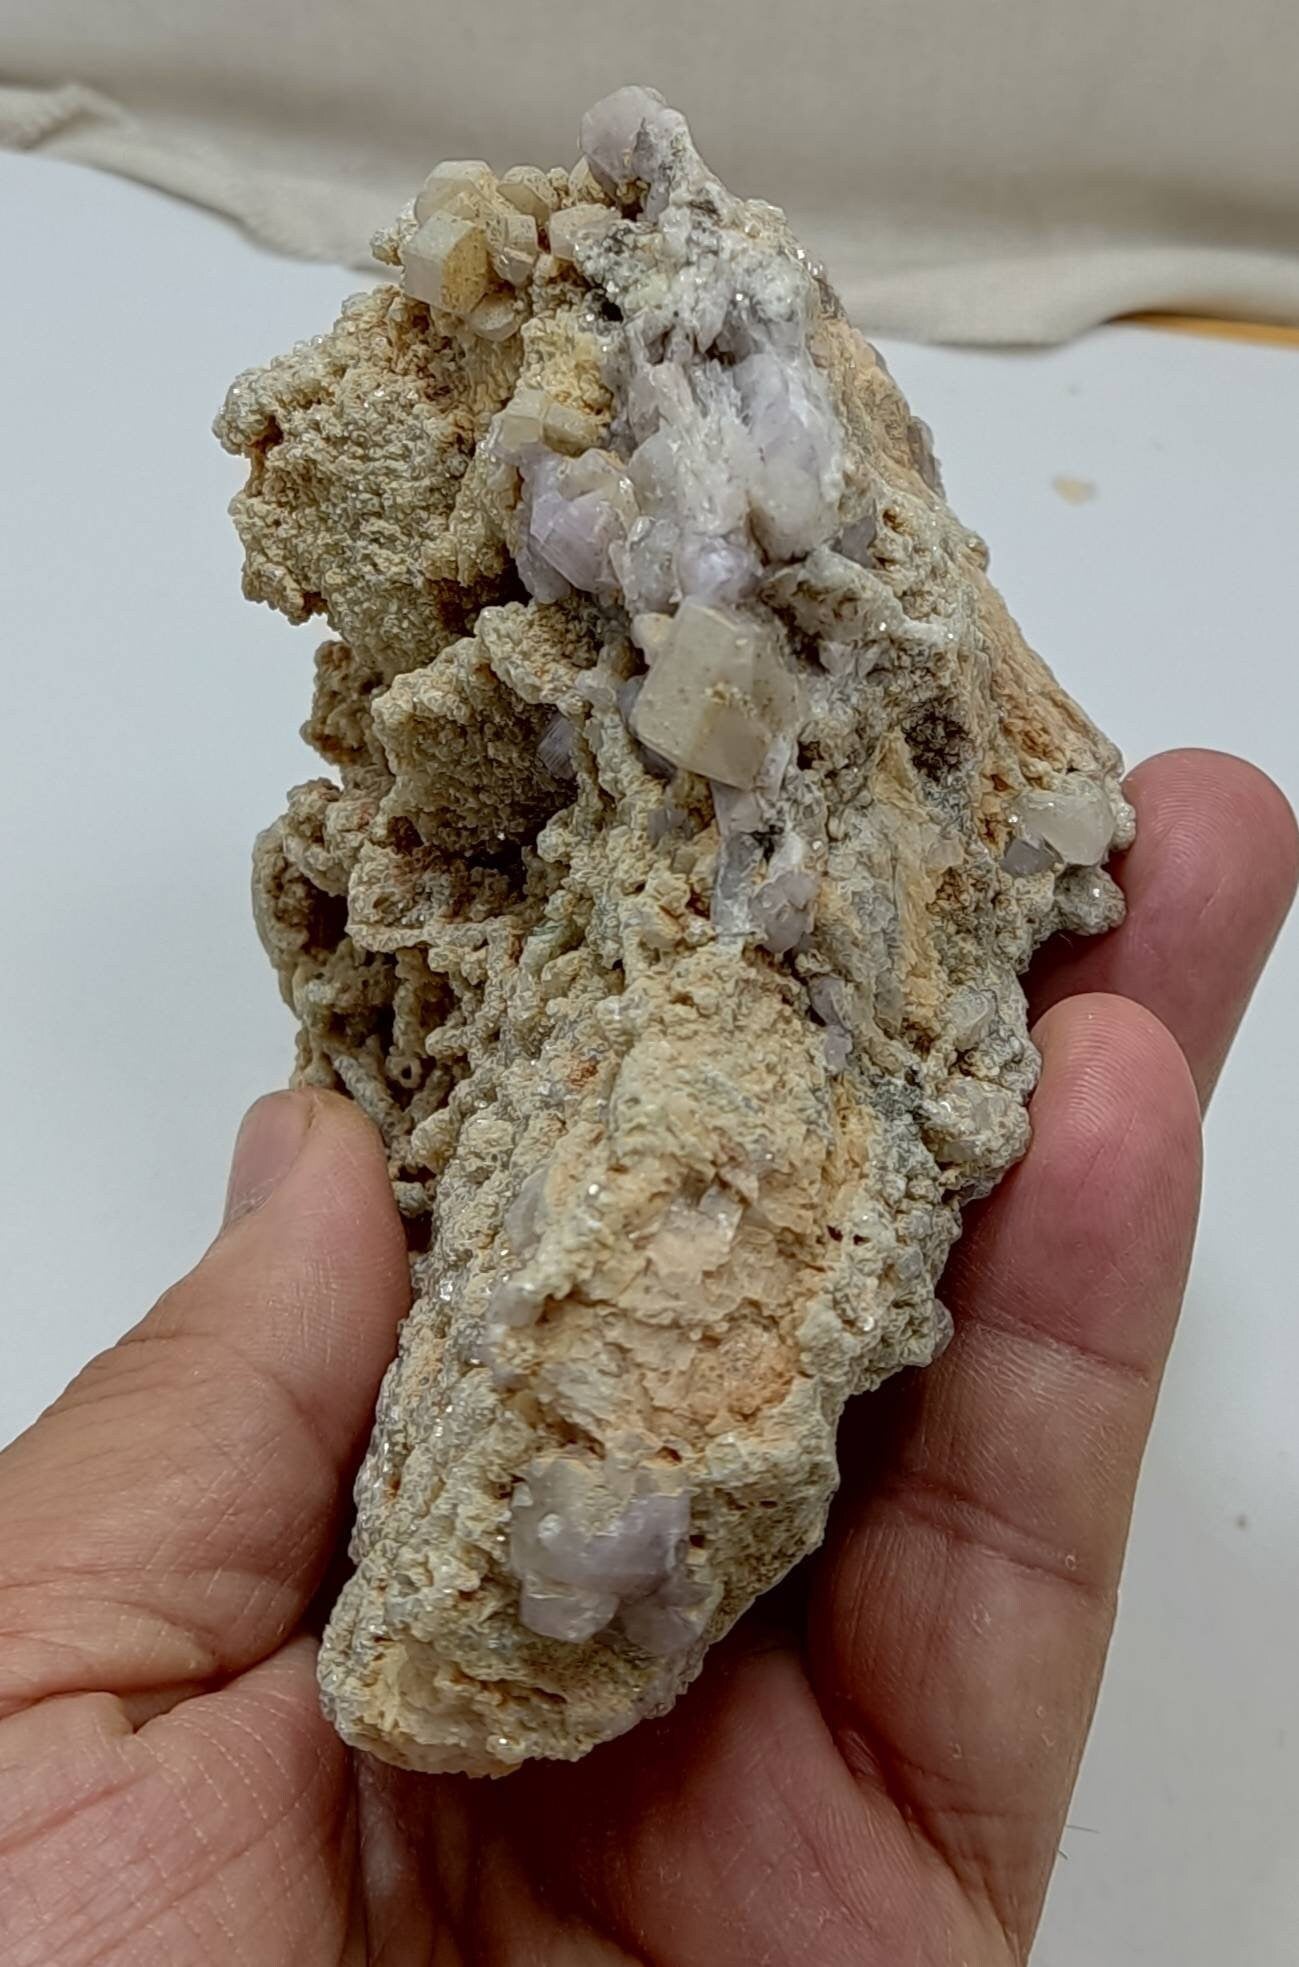 light purple Apatite crystals on matrix with sprinkled mica 560 grams